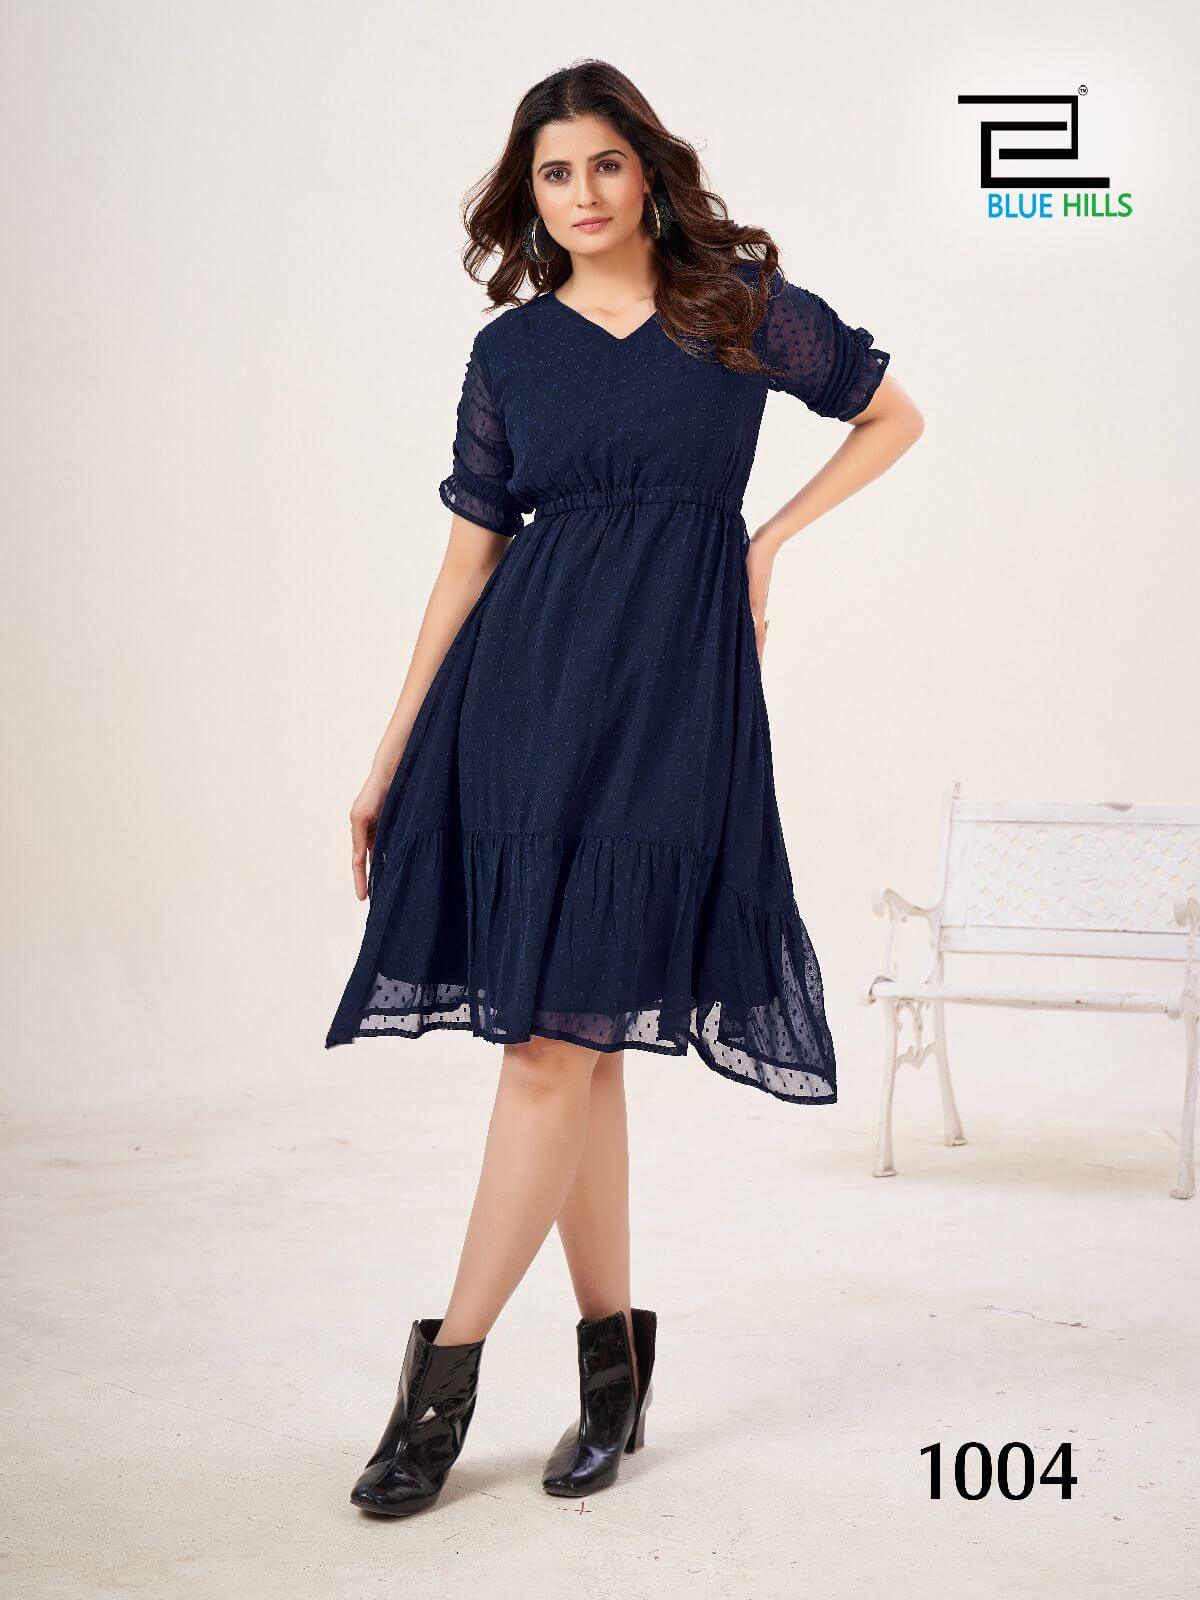 Blue Hills Charming One Piece Dress Catalog collection 2